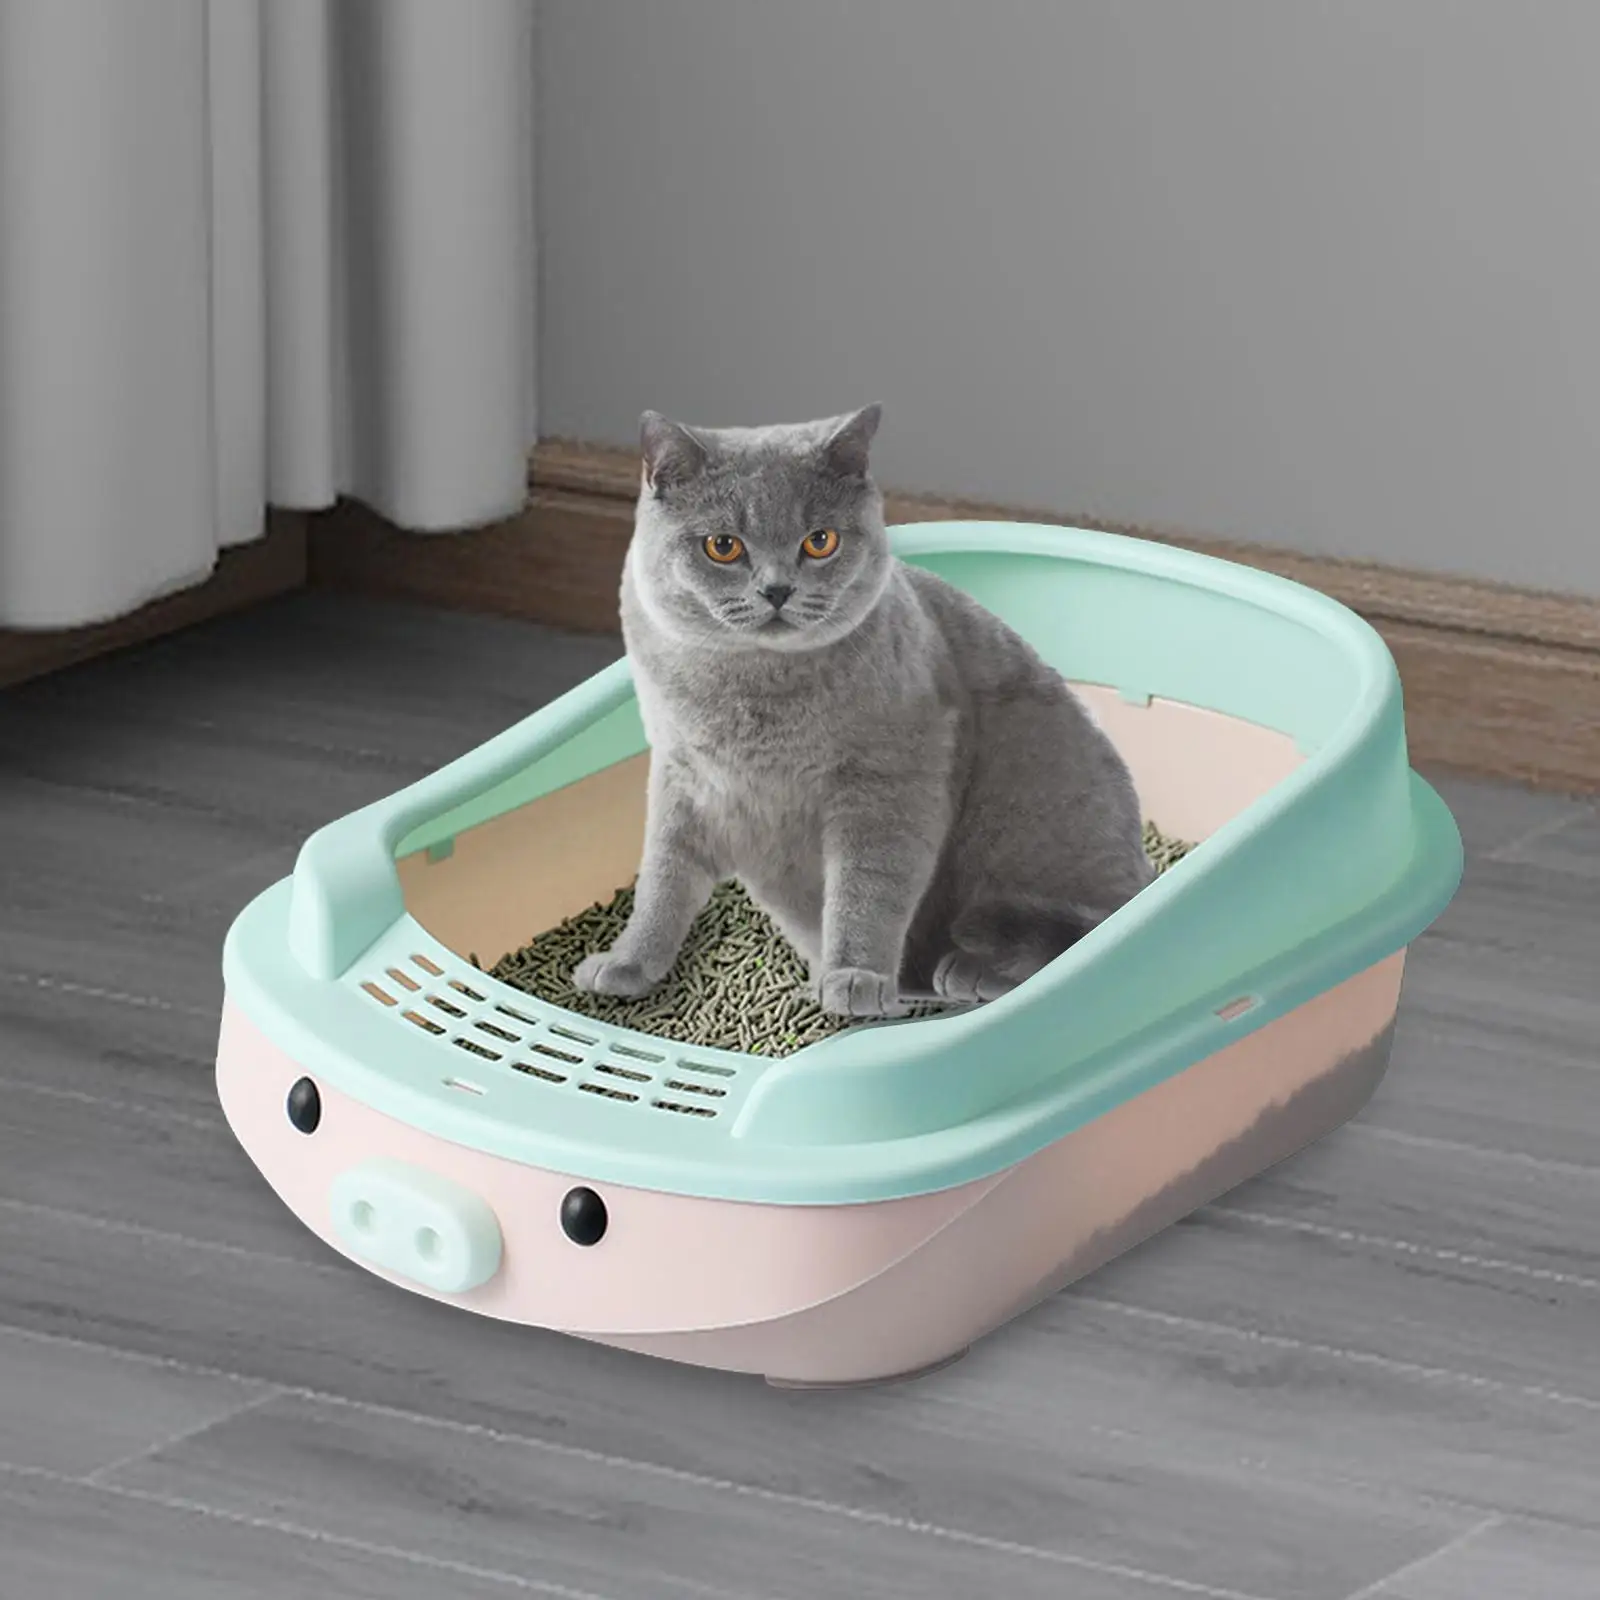 Portable Open Cats Litter Pan with Cat Scoop Open Top Kittens Litter Pan for Small Pets Dogs Cats Kittens to Senior Cats